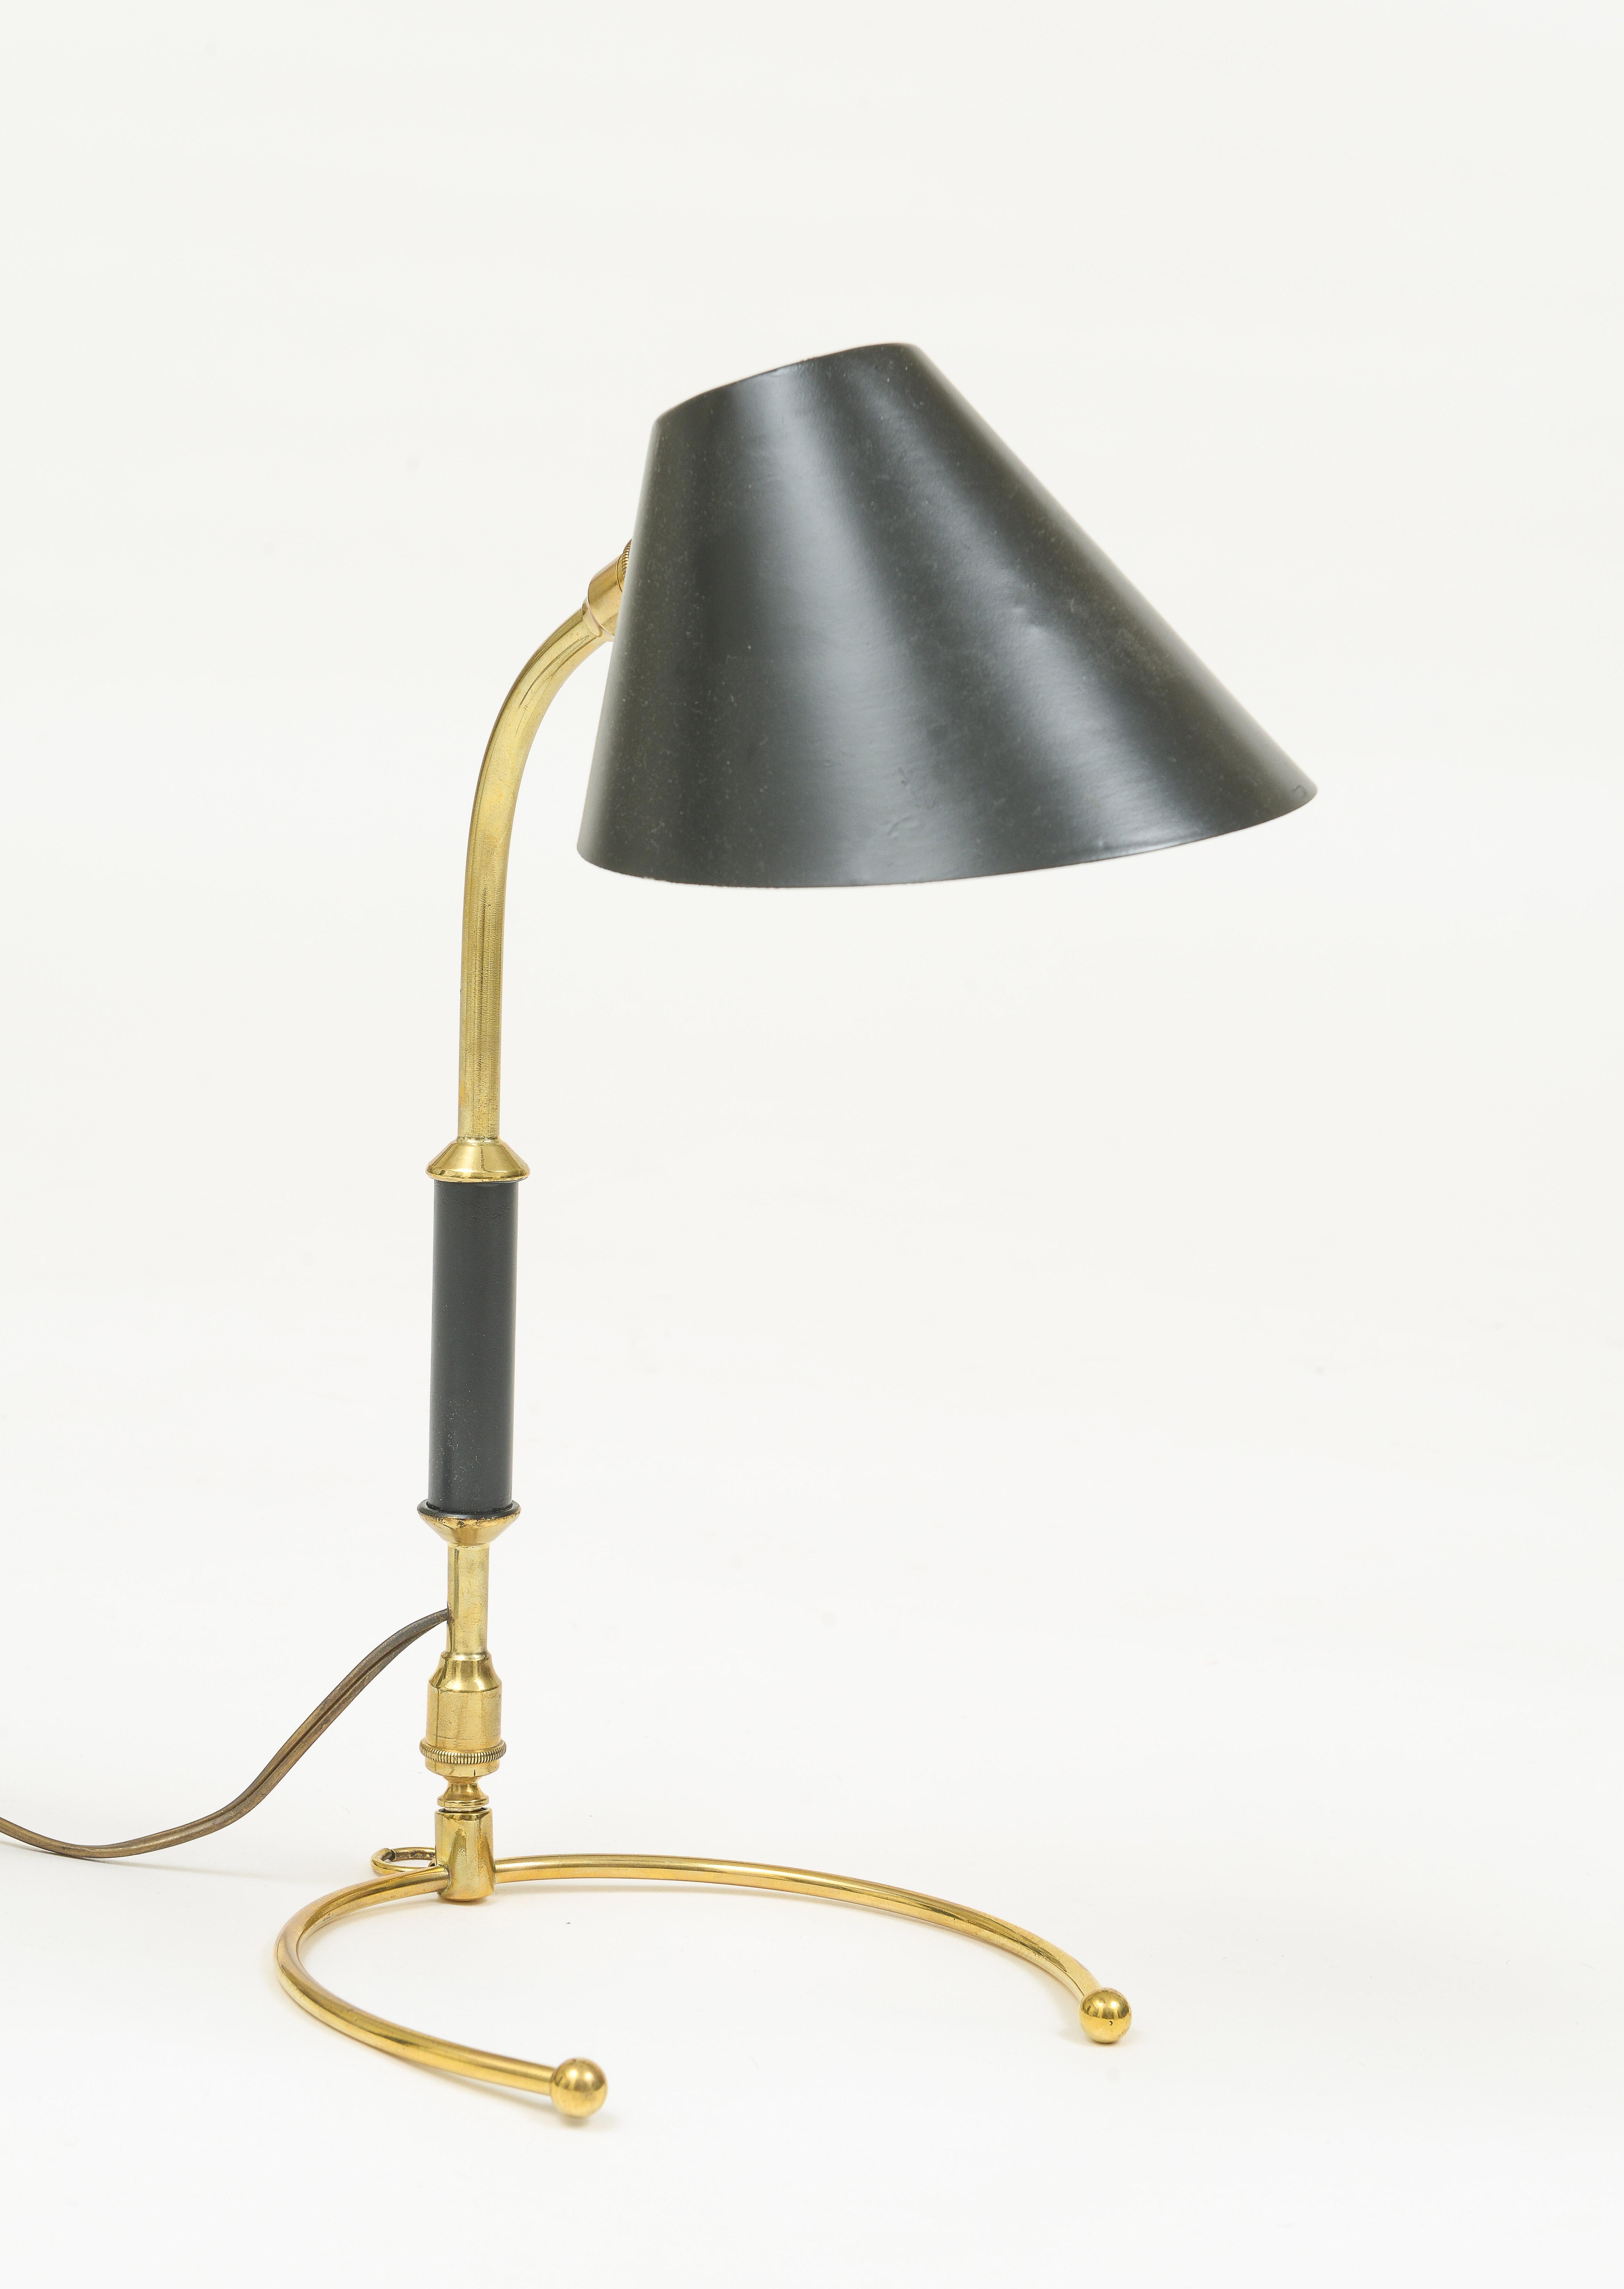 Black and brass Robert Mathieu Lunel articulating desk lamp with beautiufl patina and horseshoe base. The head shade swivels in all directions. The base all has a swiveling mechanism. 
Chic and handsome. Beautiful condition.